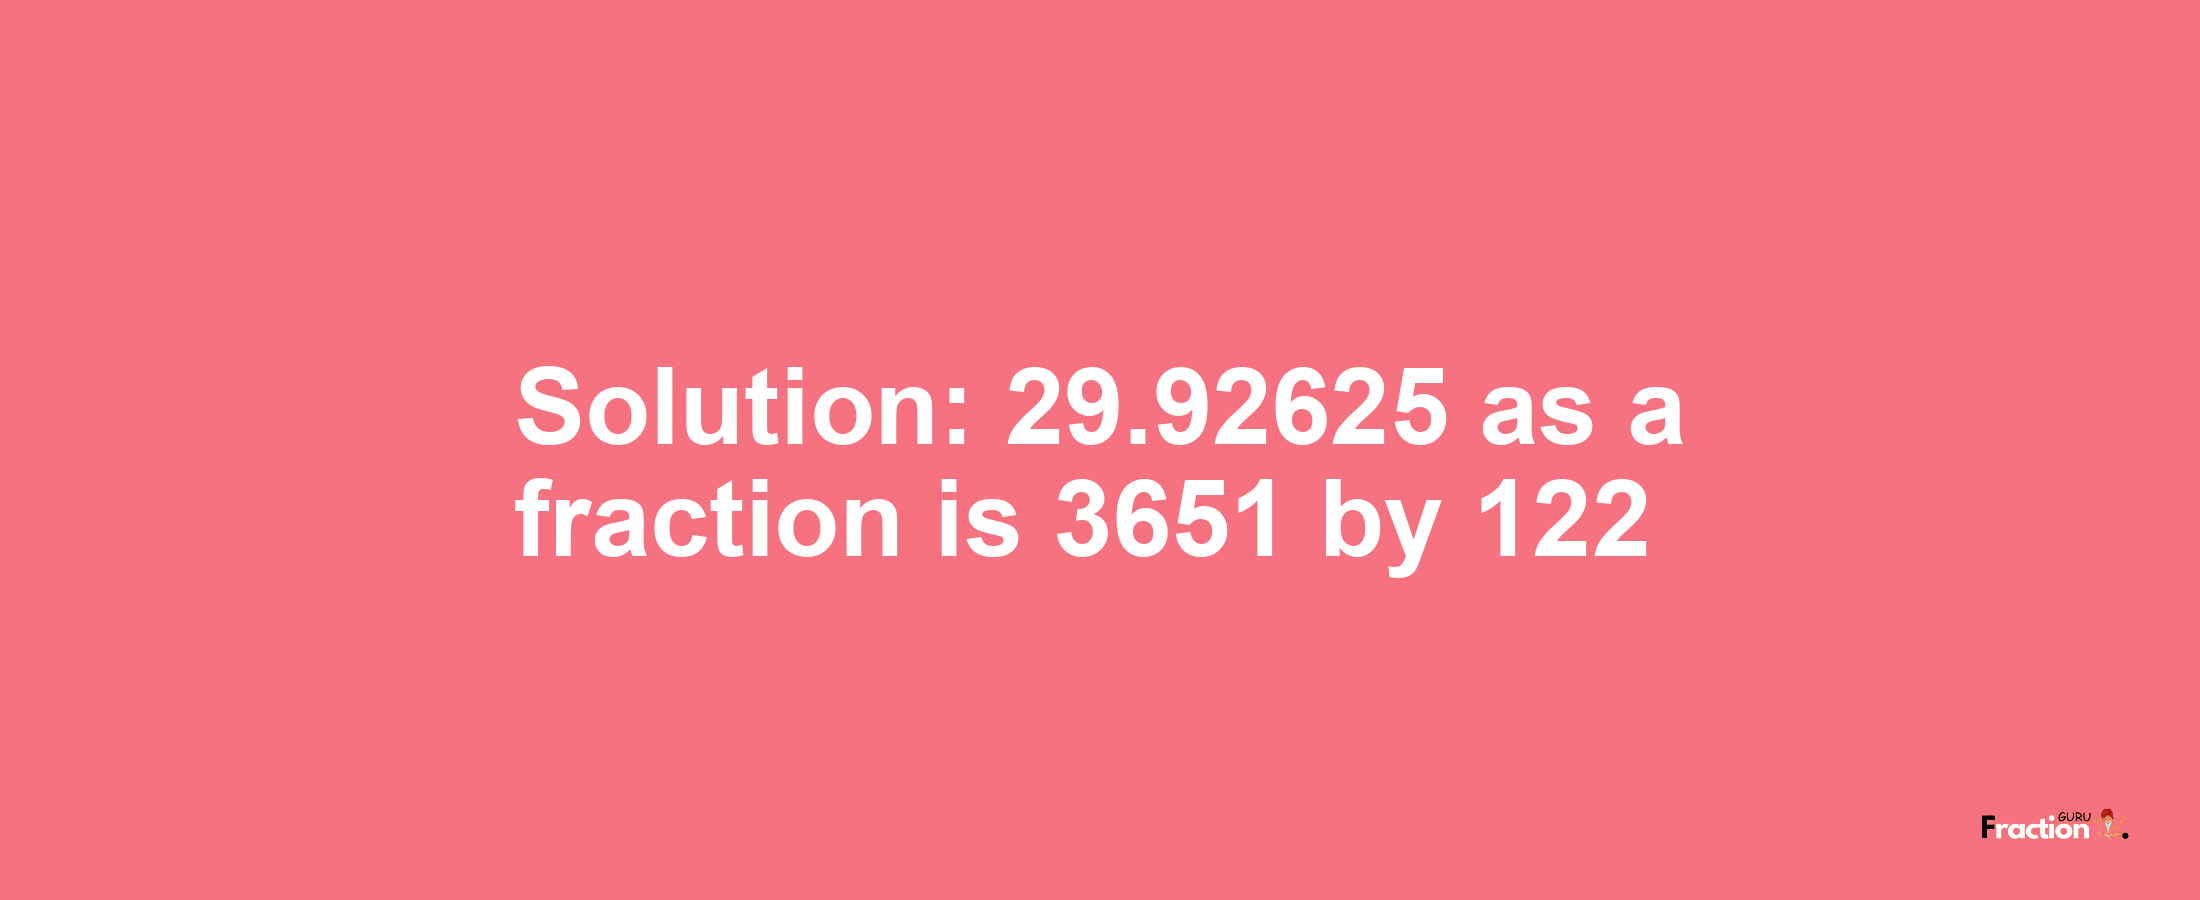 Solution:29.92625 as a fraction is 3651/122